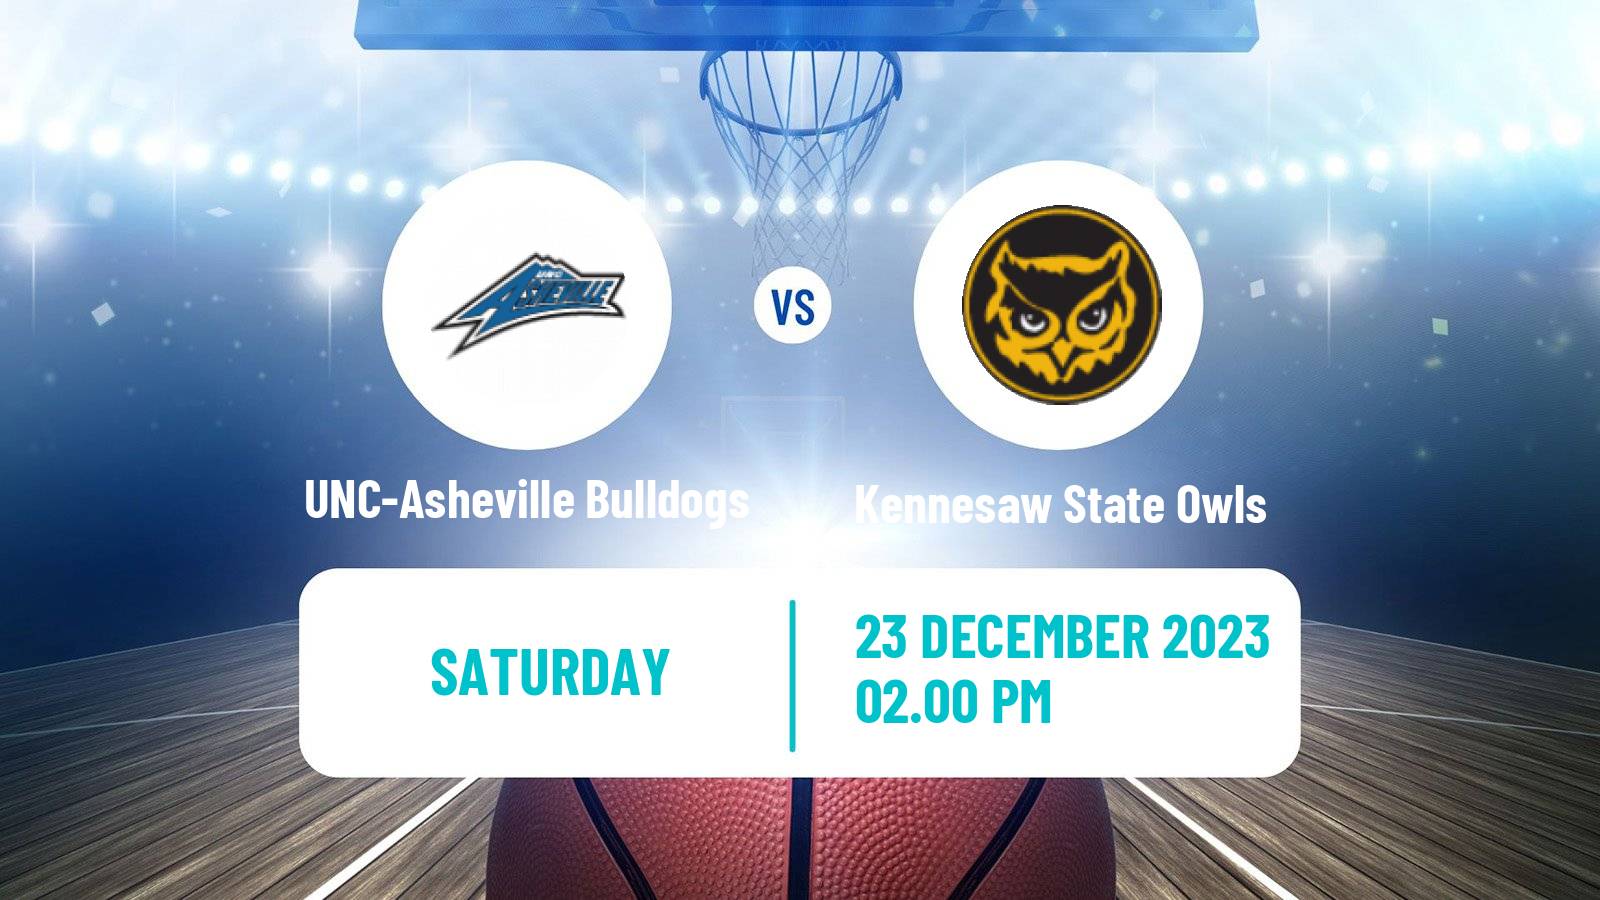 Basketball NCAA College Basketball UNC-Asheville Bulldogs - Kennesaw State Owls